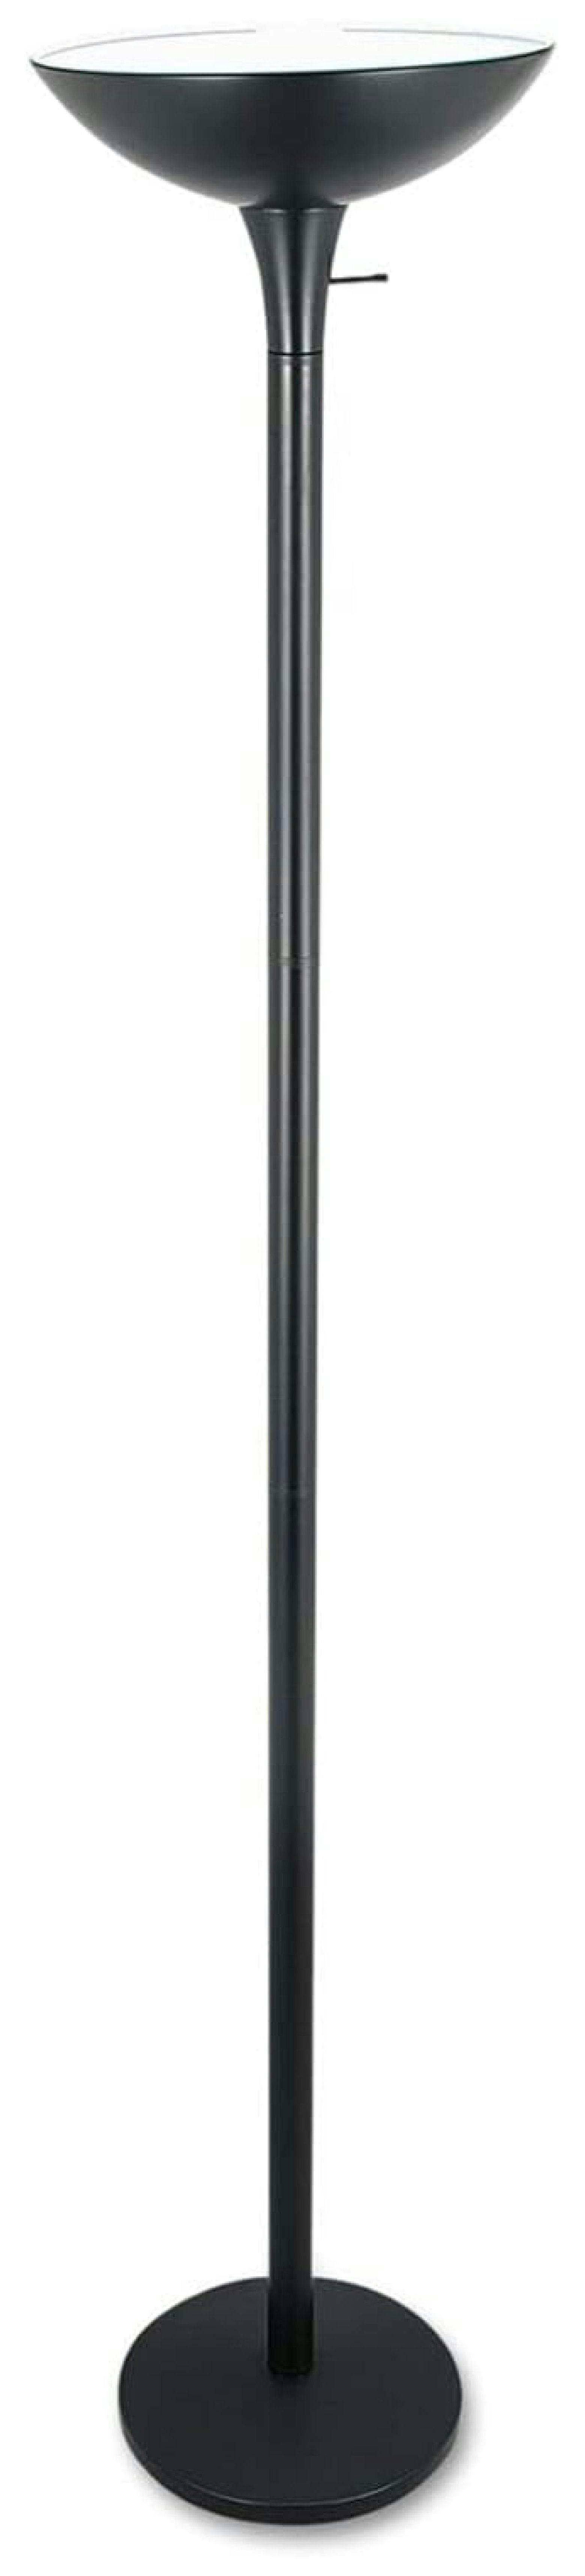 Matte Black Metal Torchiere Floor Lamp with 3-Way Switch